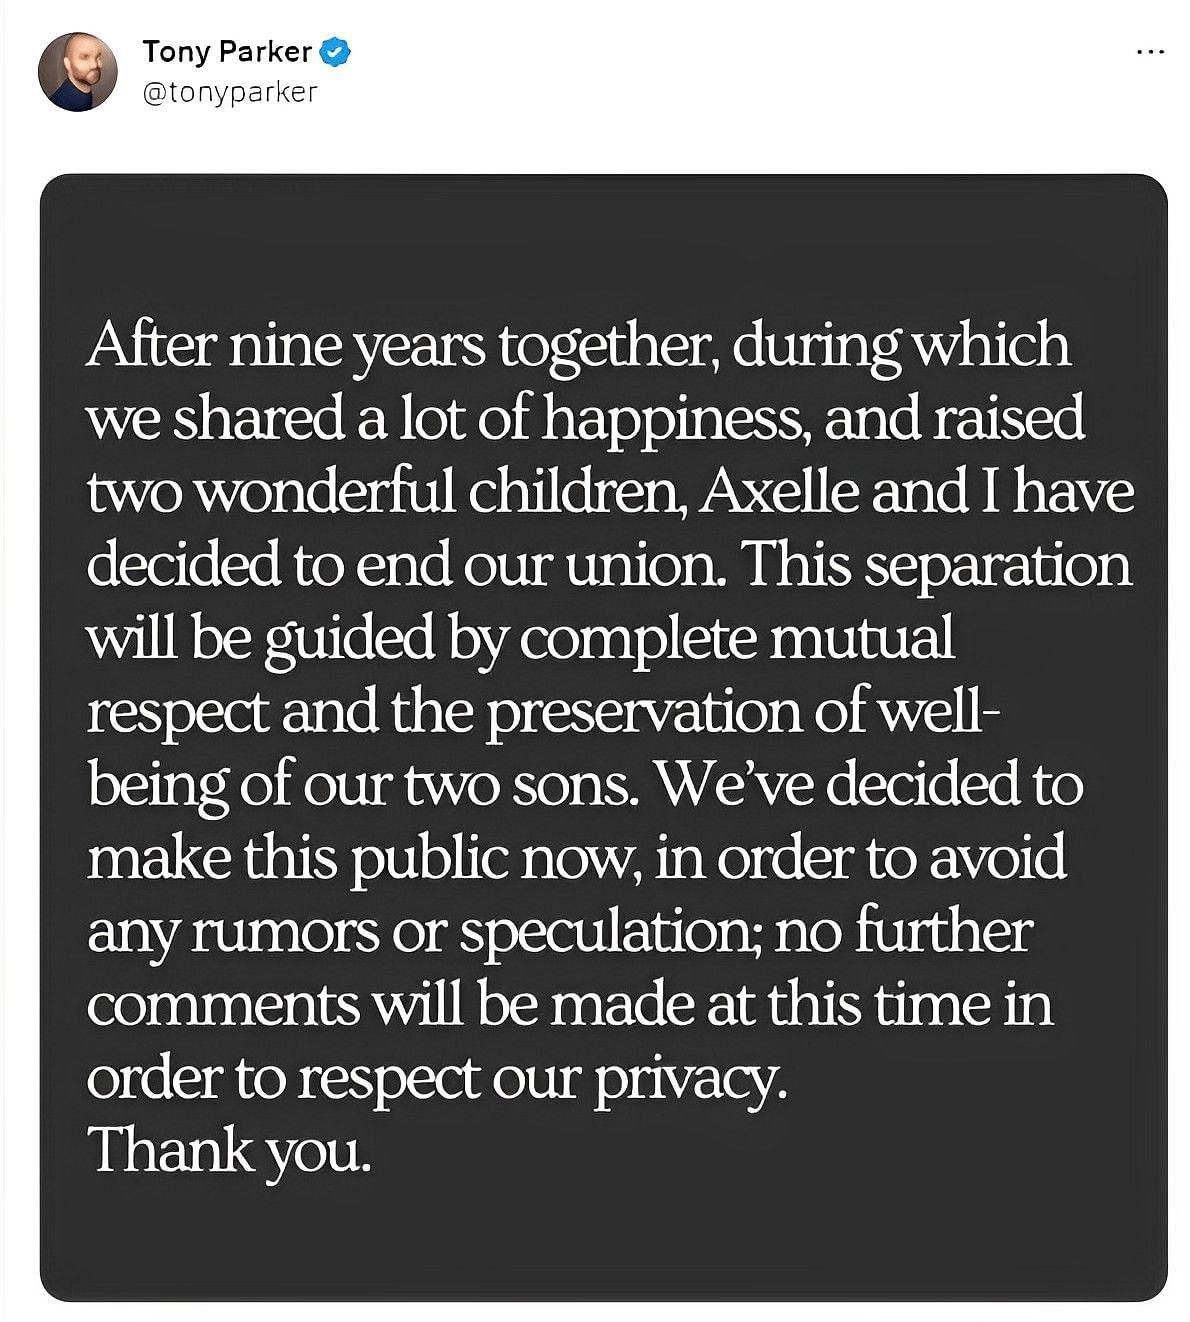 Tony announced his divorce from Axelle Francine